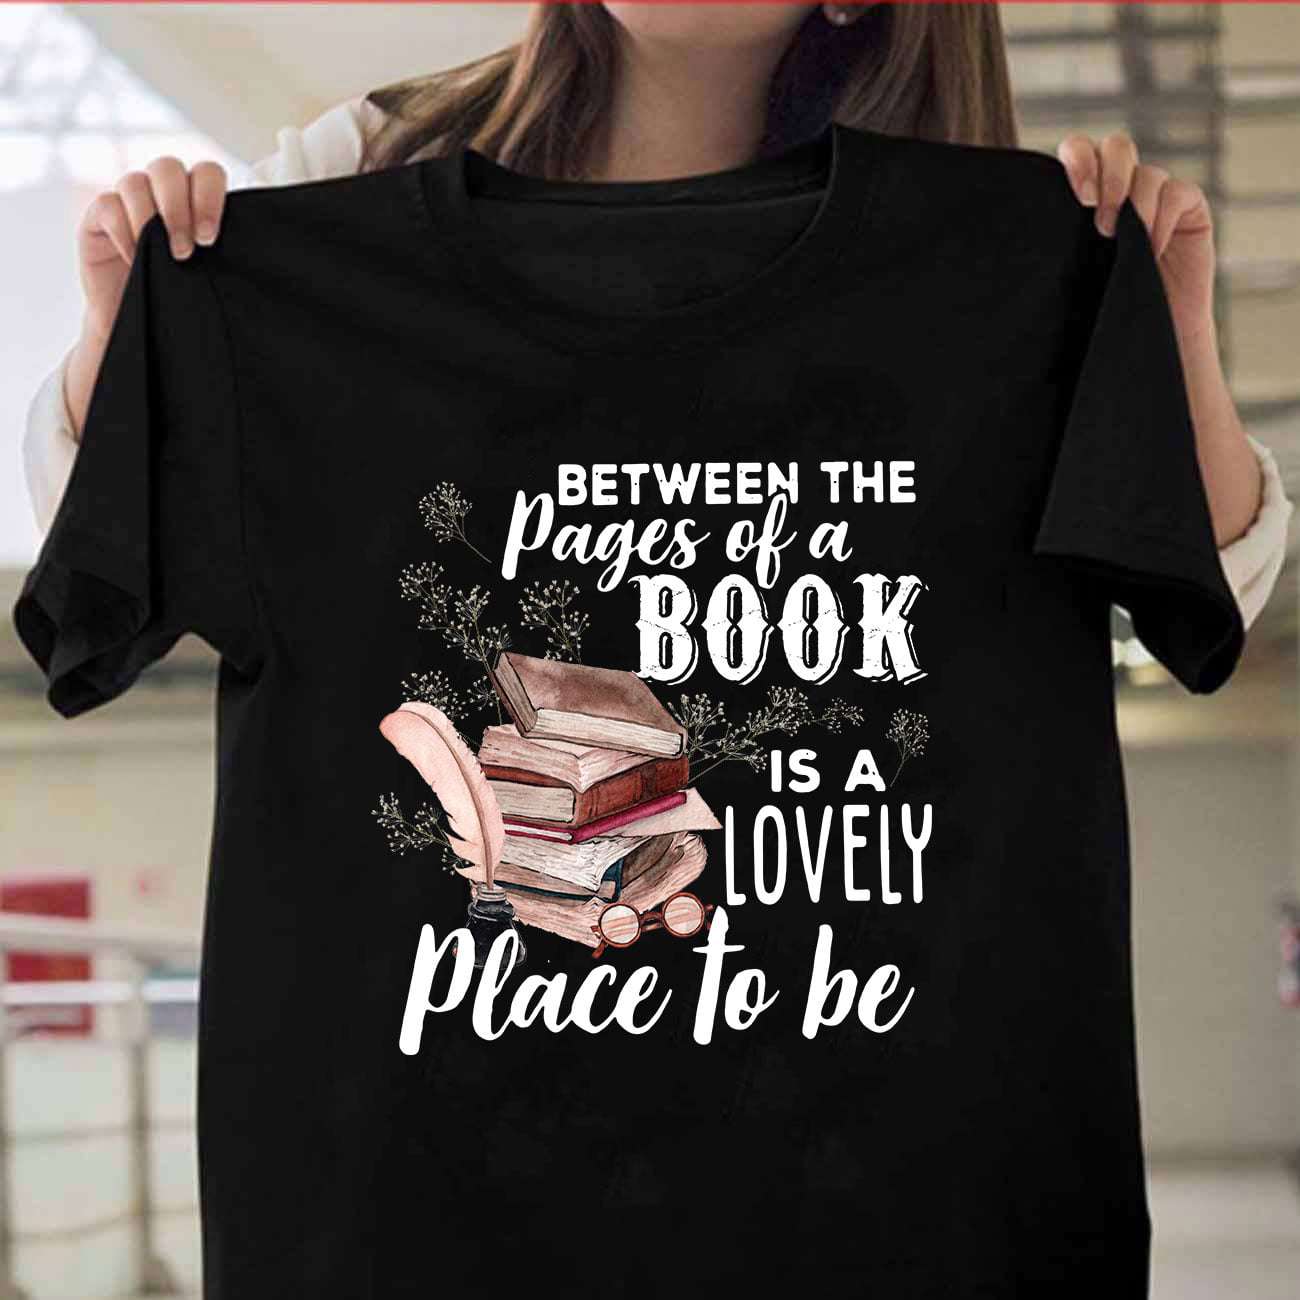 The Bookaholic - Between the pages of a book is a lovely place to be